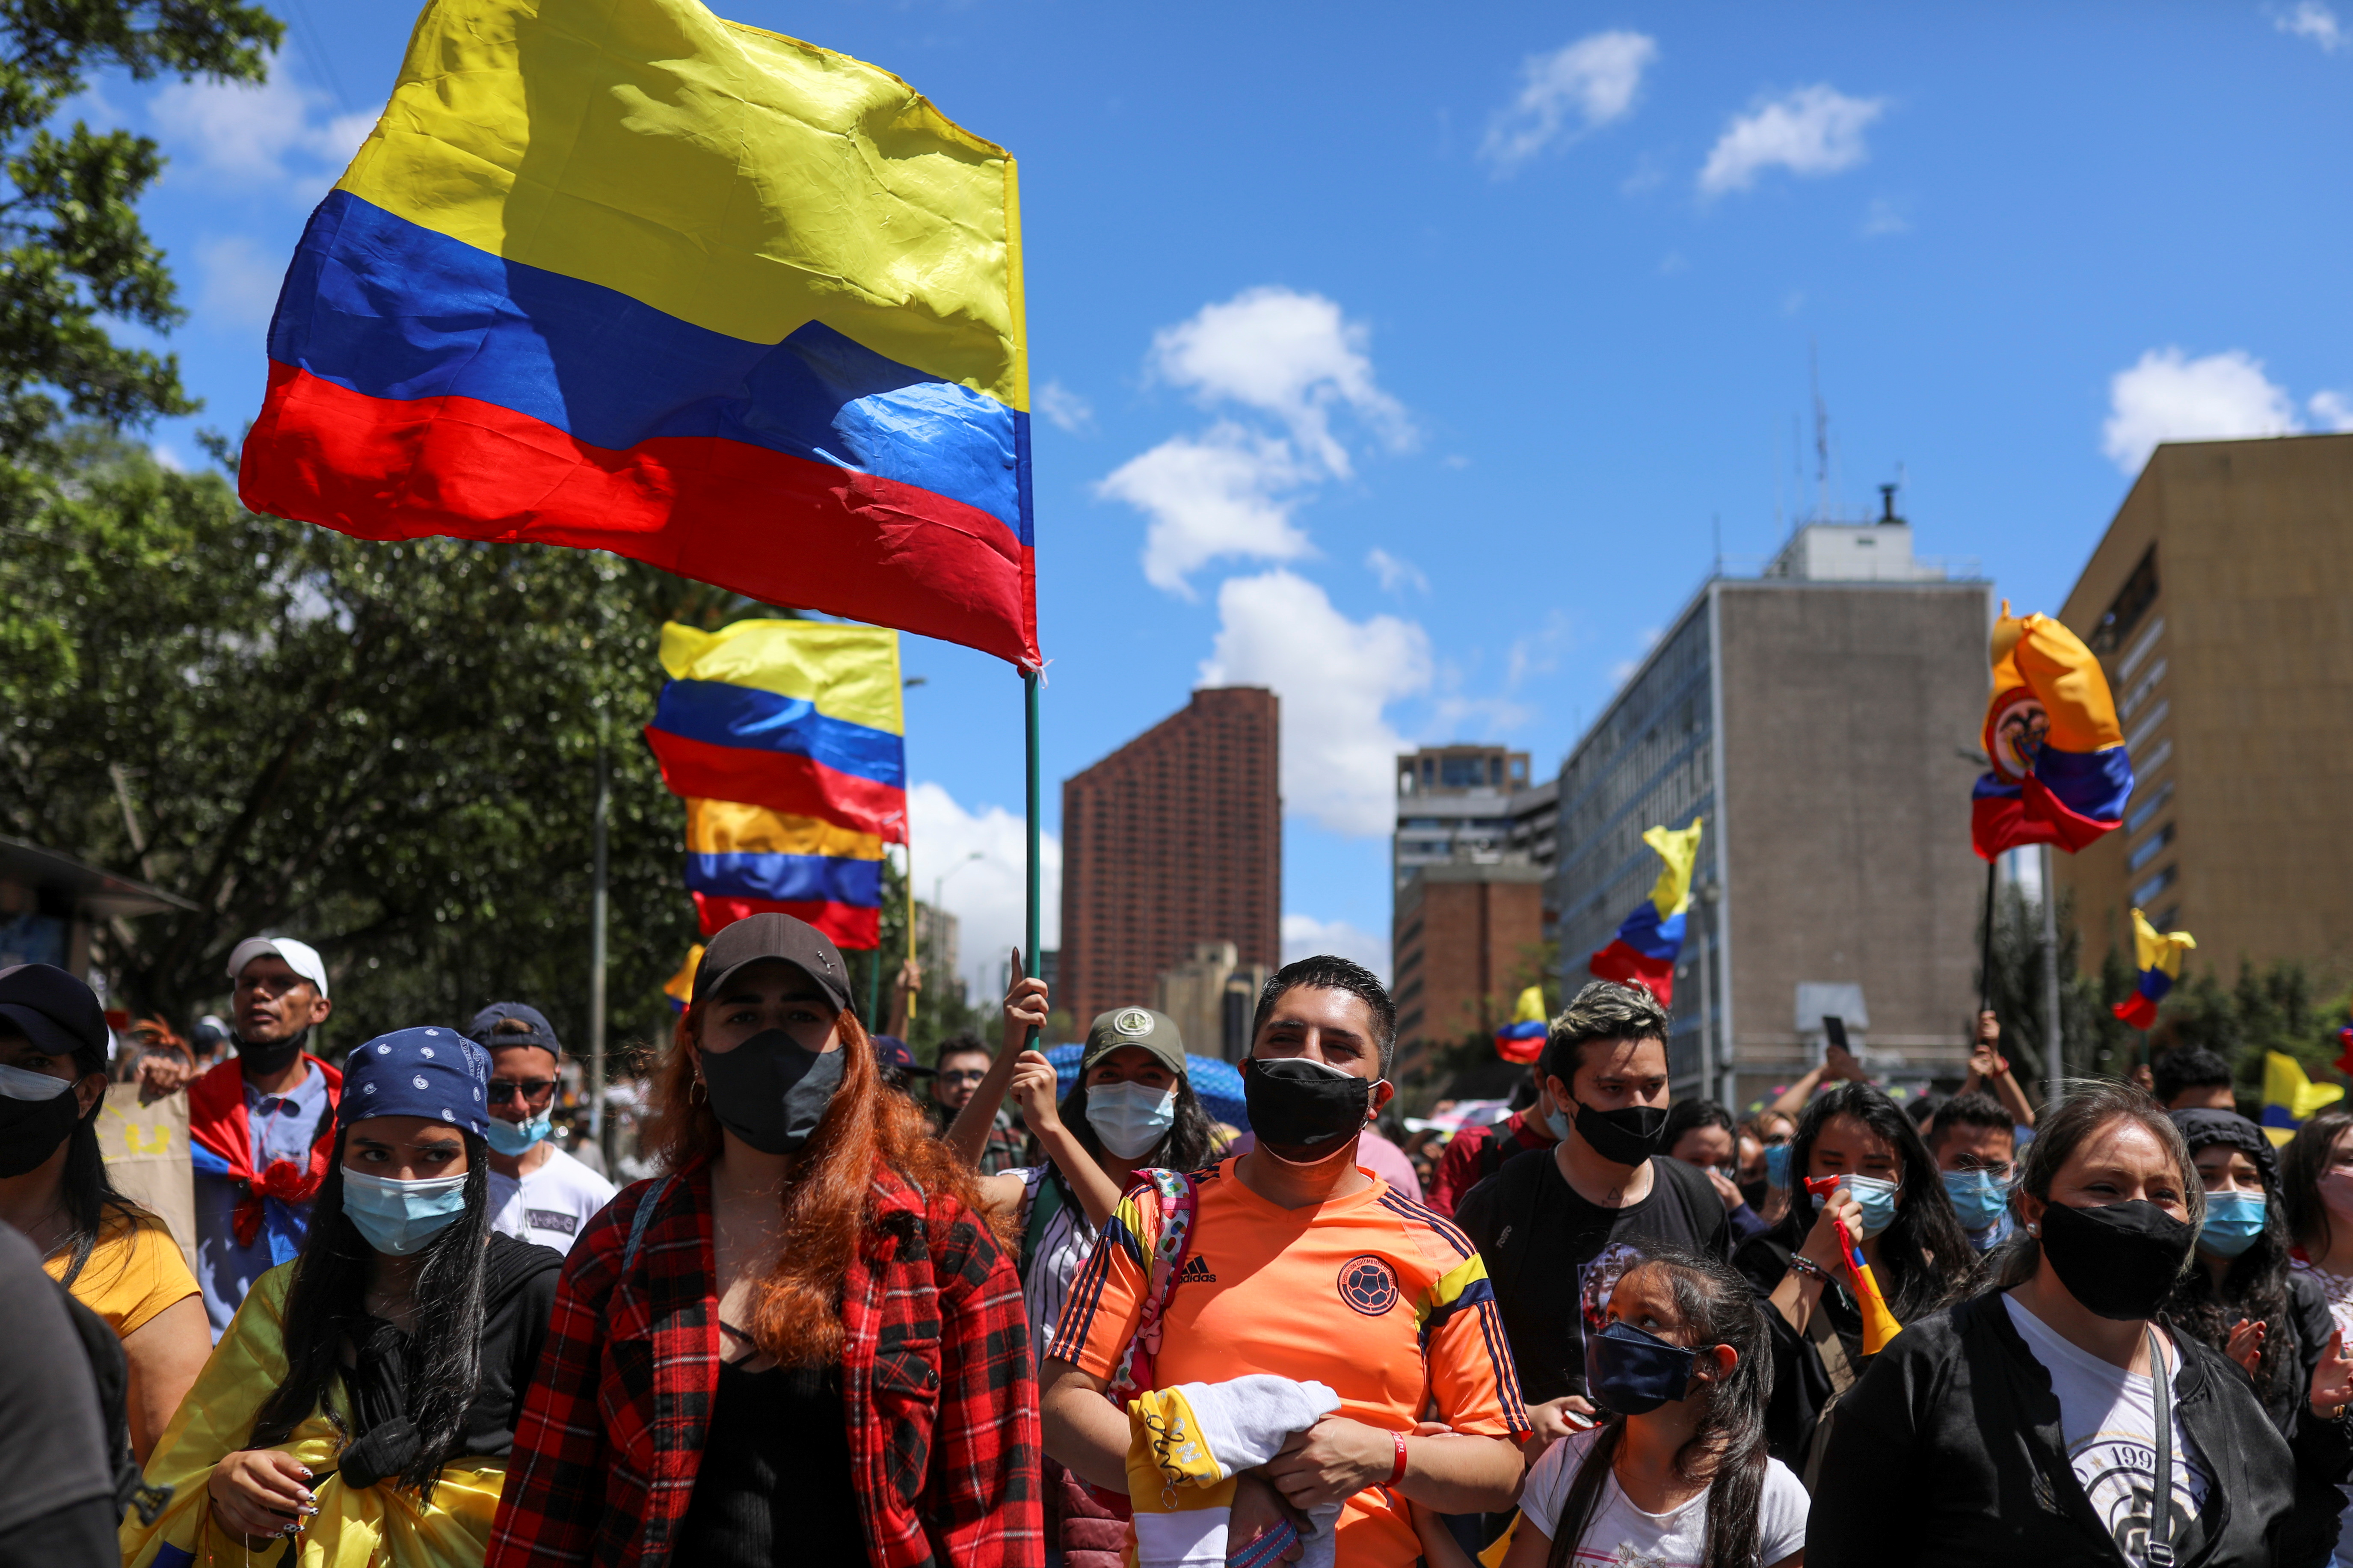 Demonstrators take part in a protest in Bogota, Colombia, May 9, 2021.